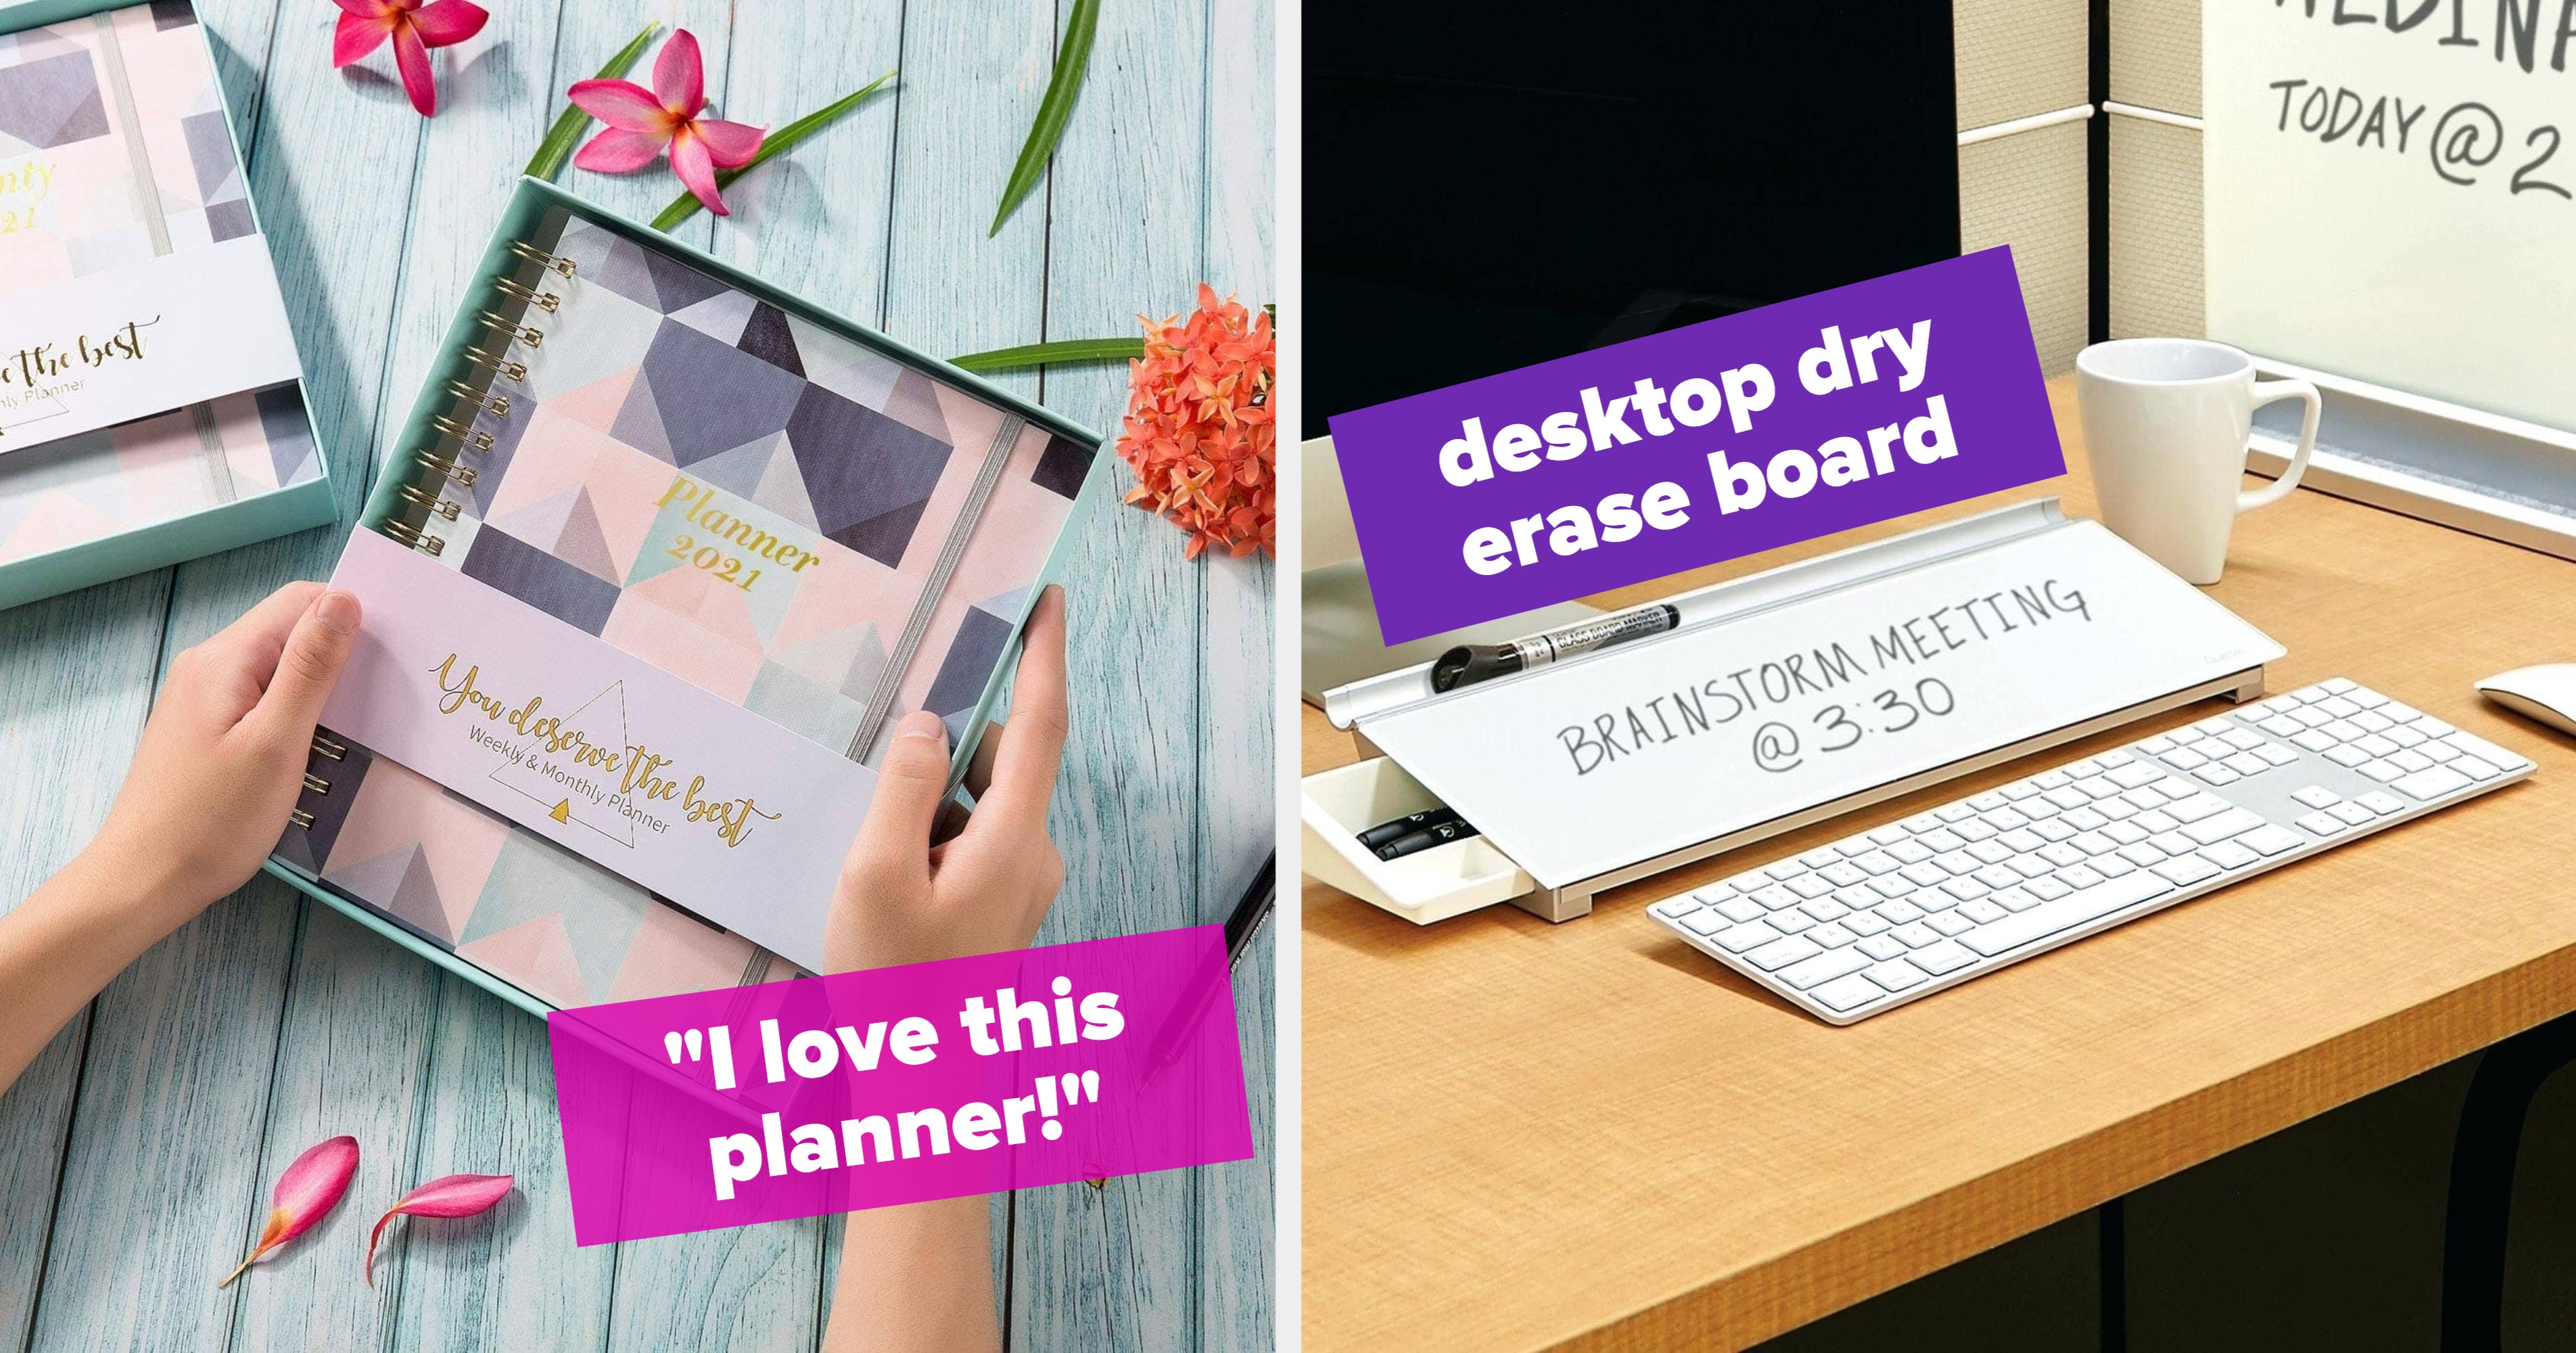 43 Gifts For People Who Spend All Day At Their Desks